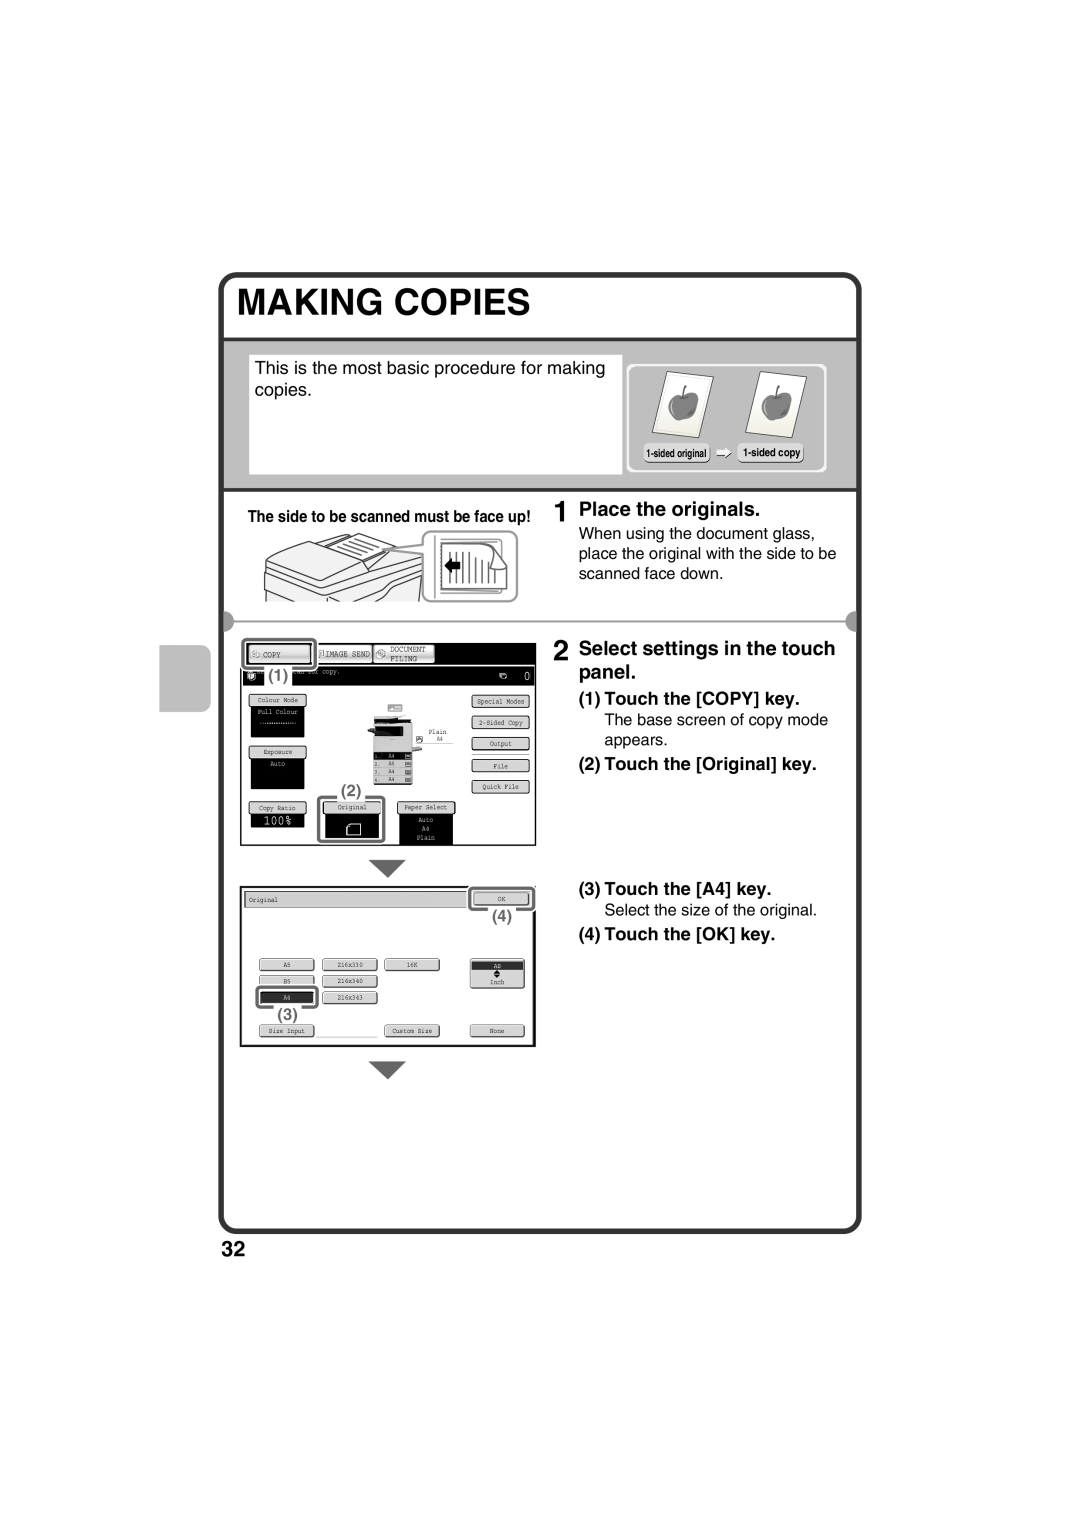 Sharp MX-C311 Making Copies, Select settings in the touch panel, Touch the COPY key, Touch the Original key, 100%, Copy 